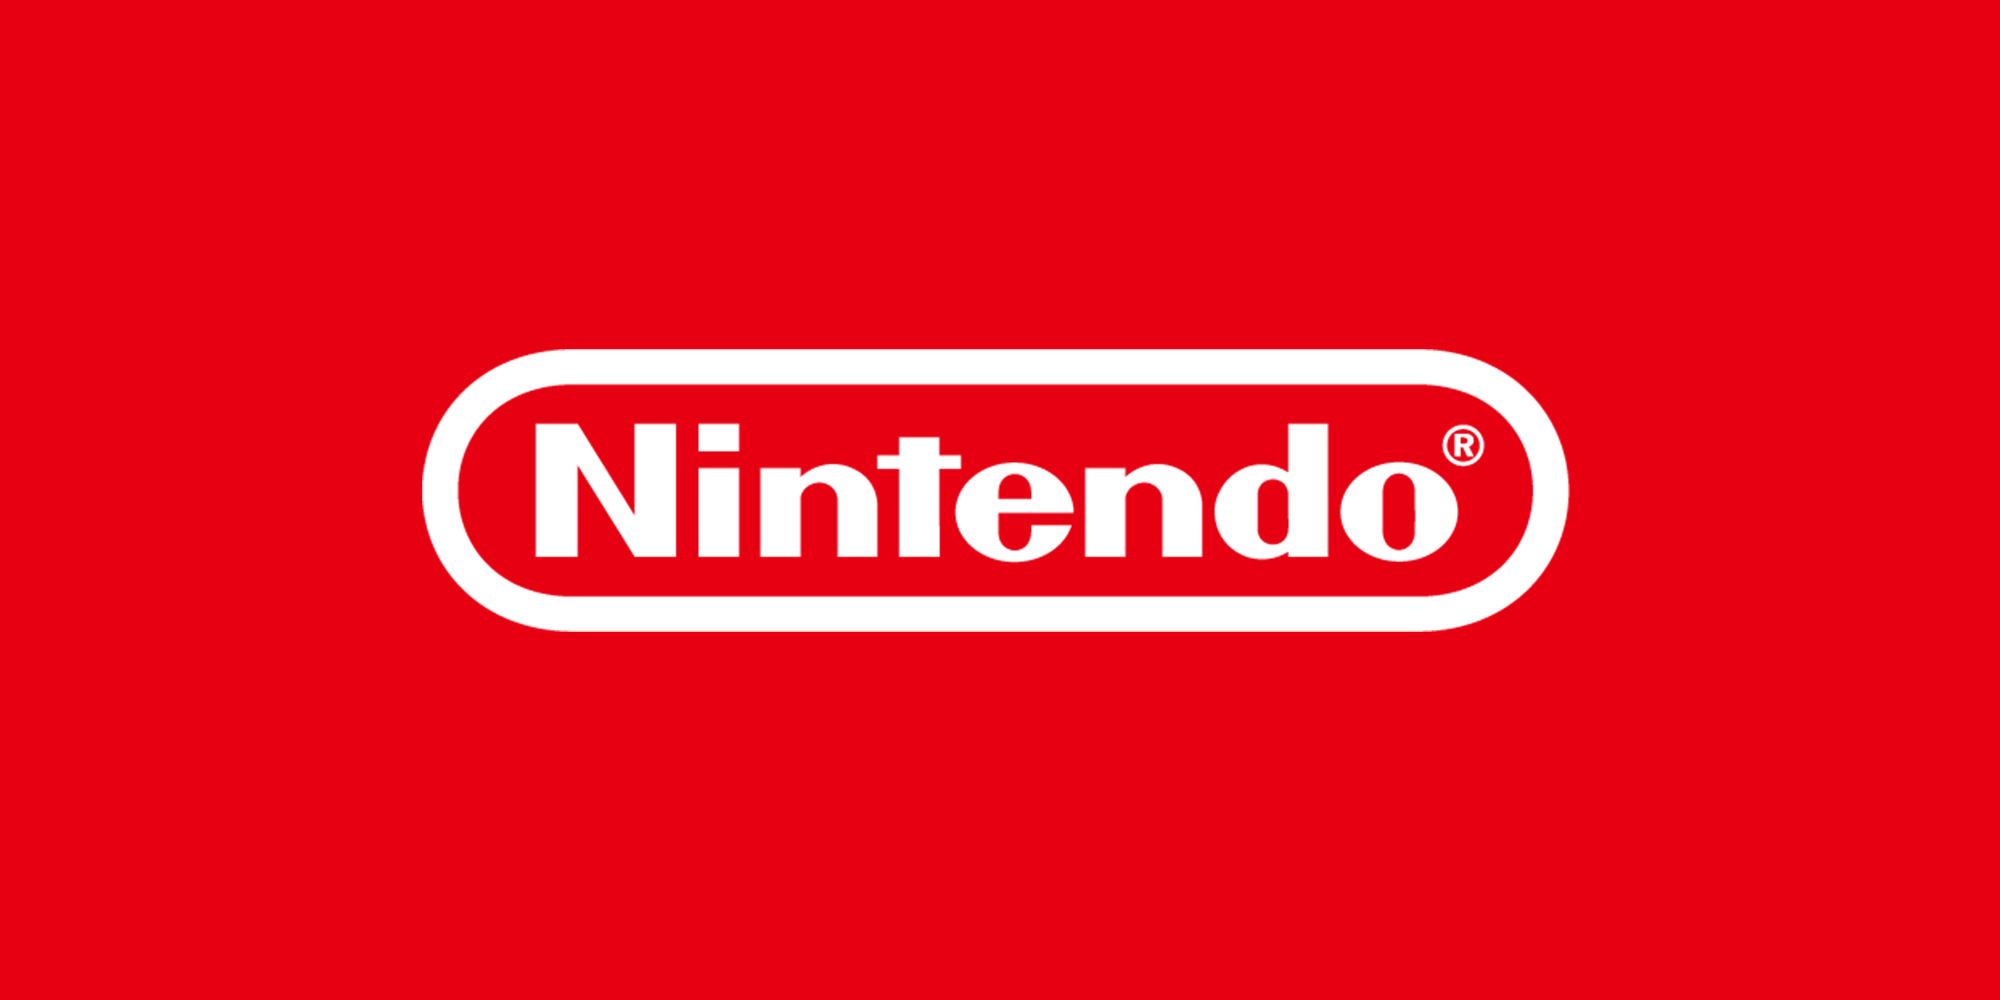 Nintendo Confirms That Its Next Console Will Be Releasing Sometime Before The Year 2100